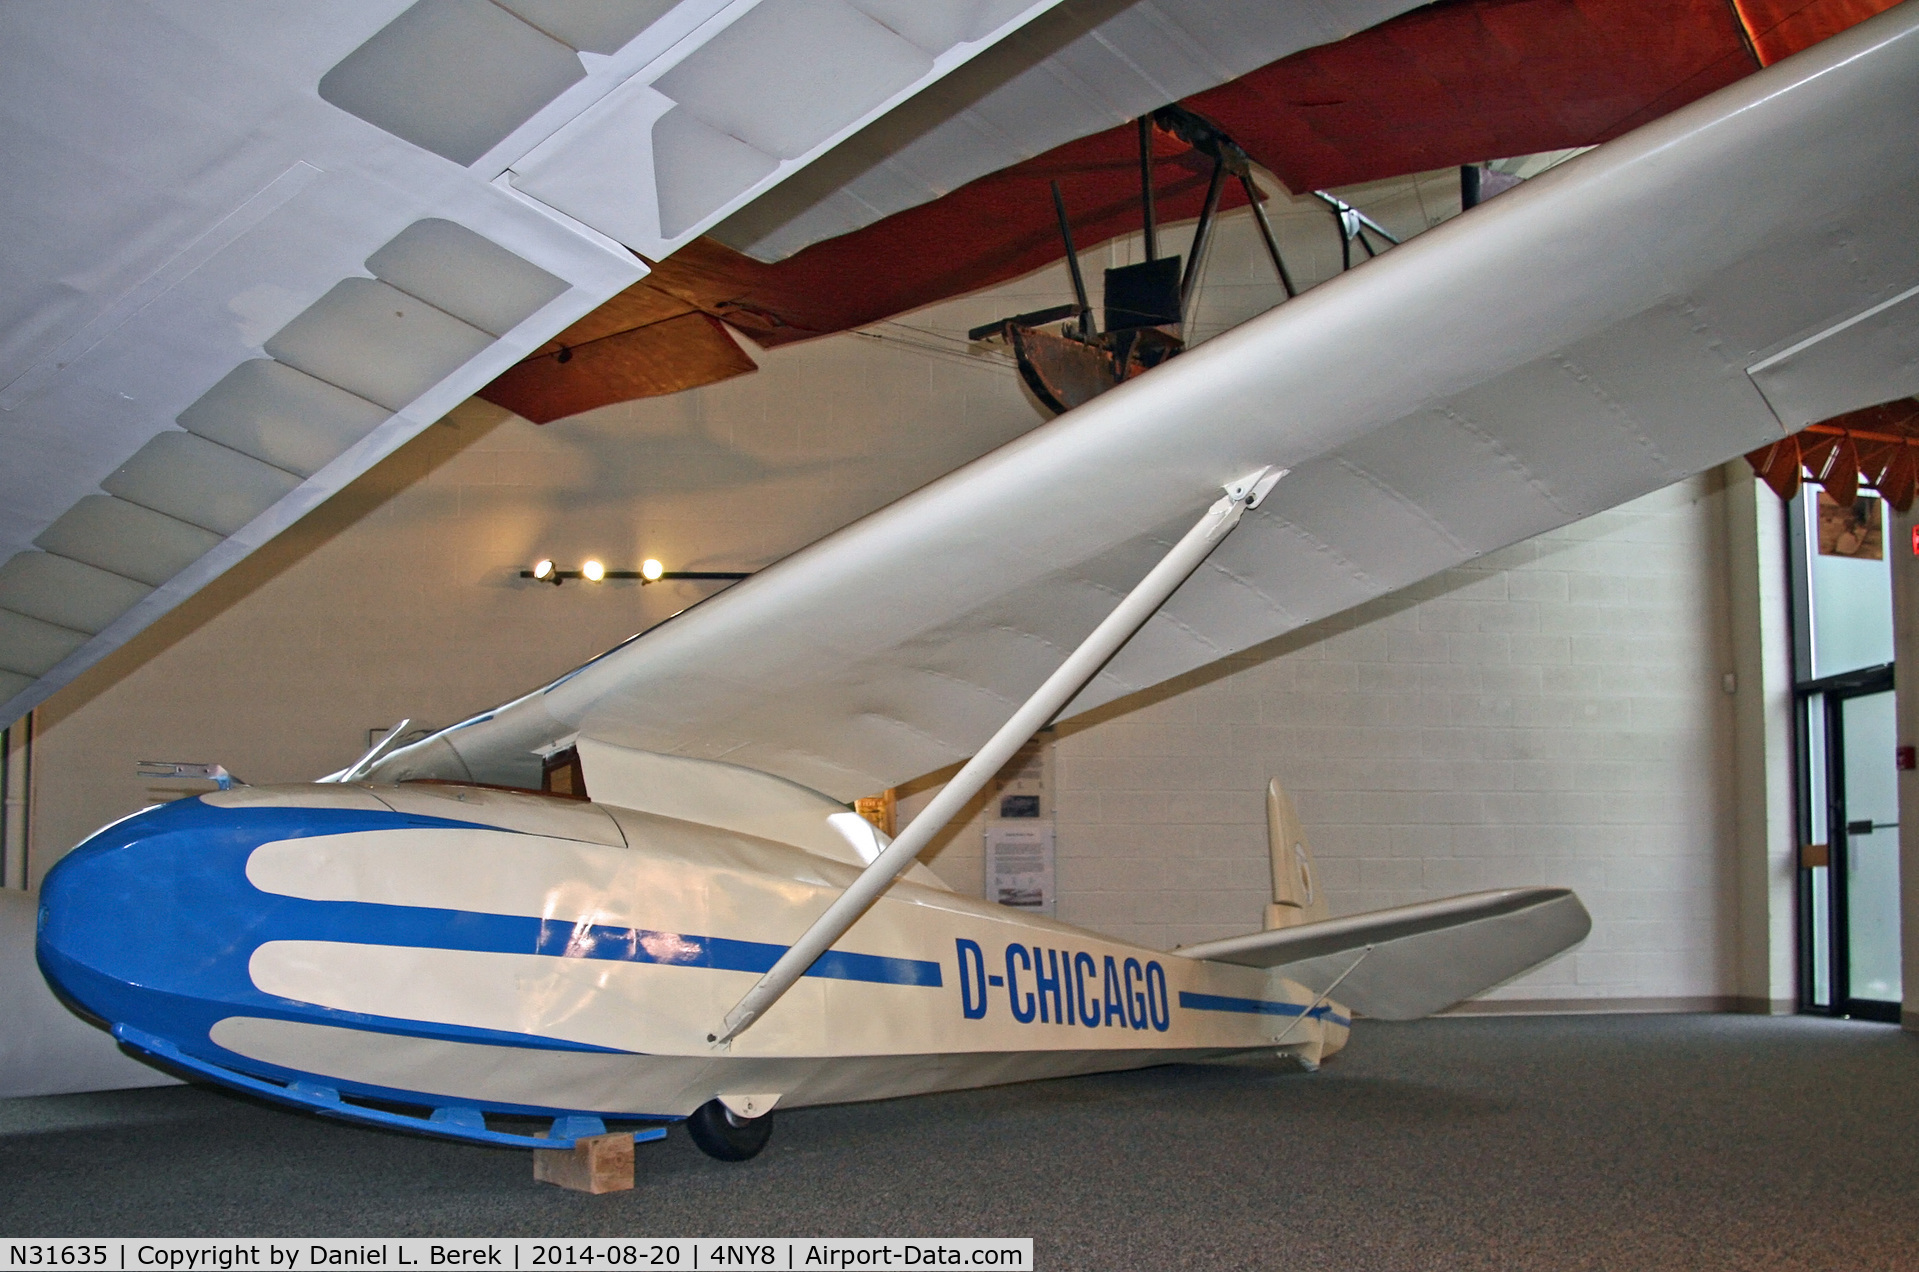 N31635, 1945 Schempp-Hirth Goppingen Go 1 Wolf C/N CPS1, This classic sailplane is now preserved at the National Soaring Museum.